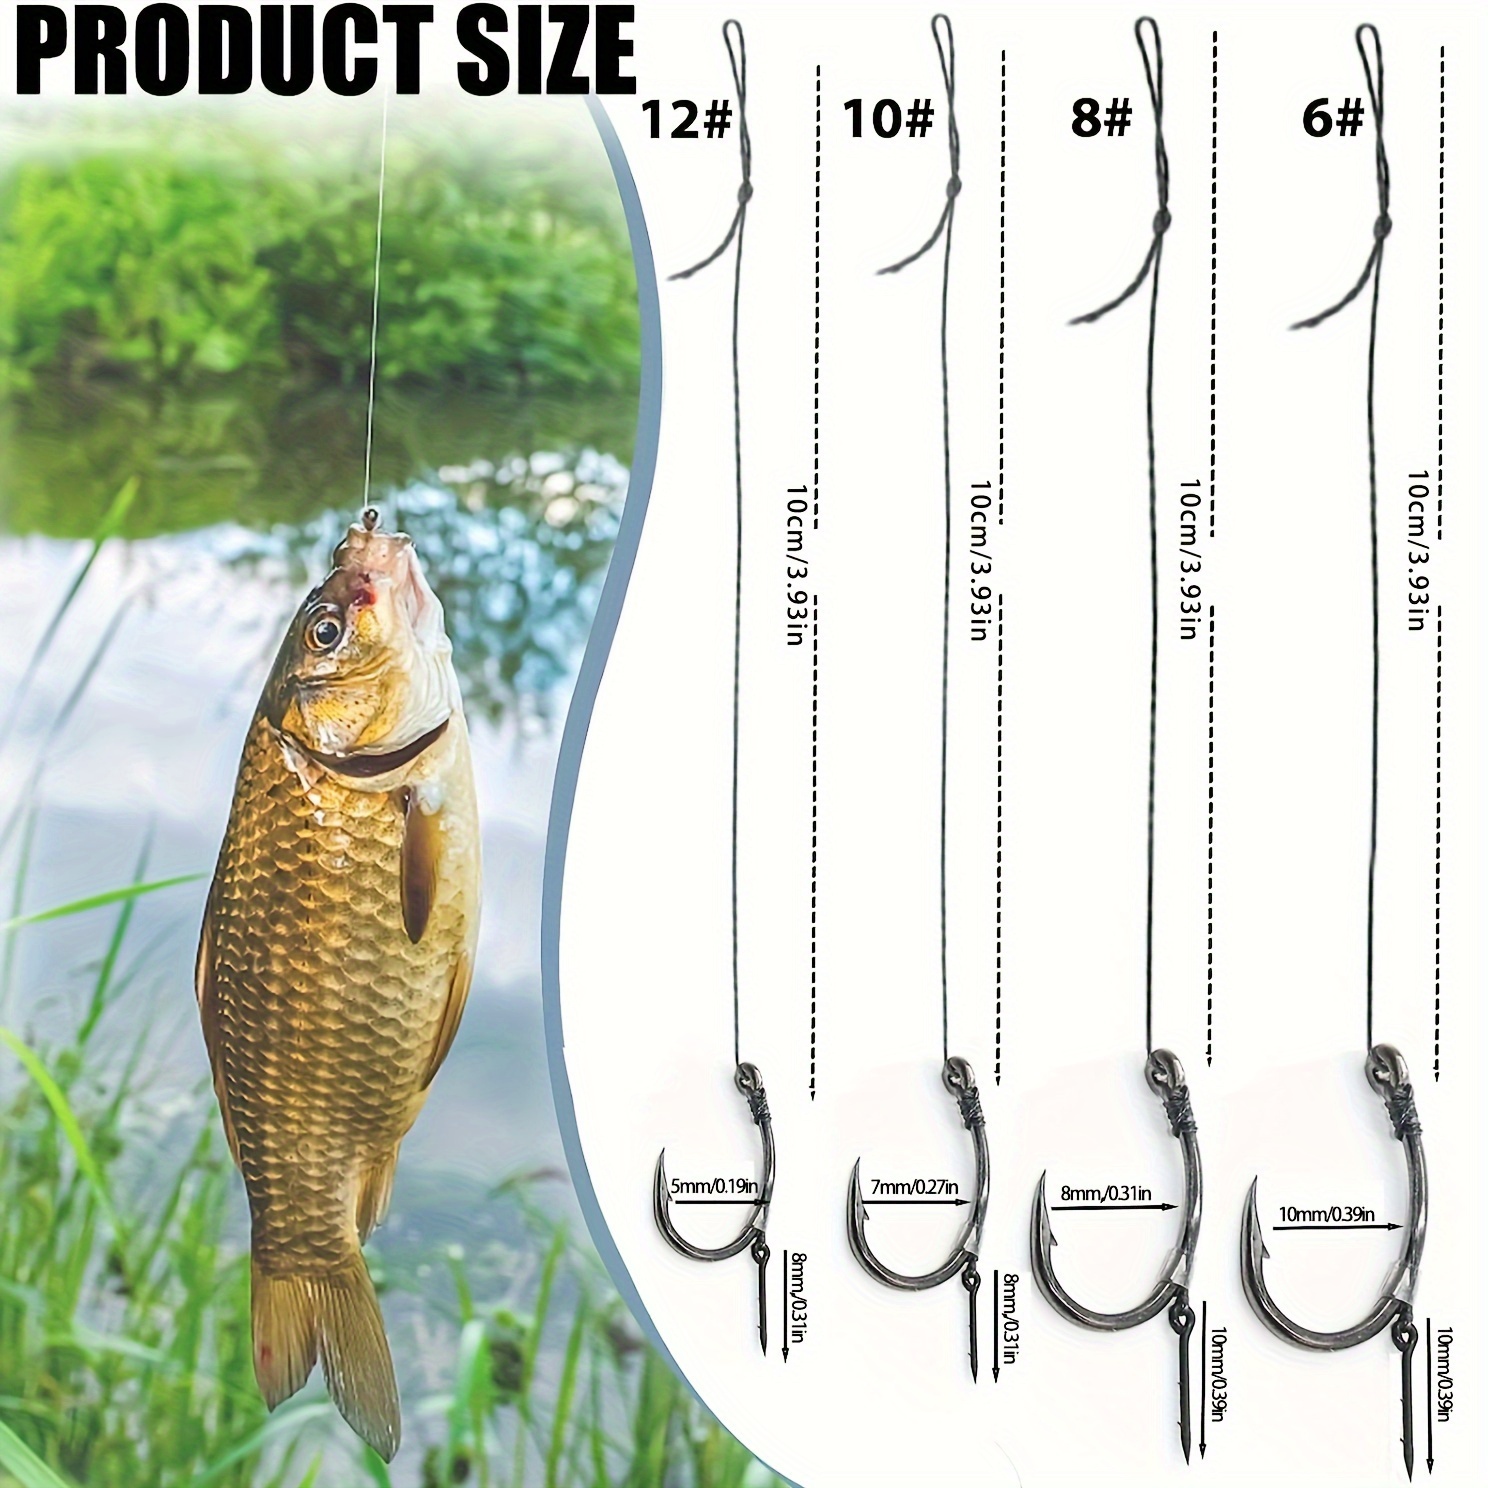 

8pcs, Yoto Method Feeder Fishing Rigs, 4-inch Braided Line, Lead Pendant, Barbed Hooks With Needle, Assorted Sizes, #6, #8, #10, #12, Perfect For Carp Fishing